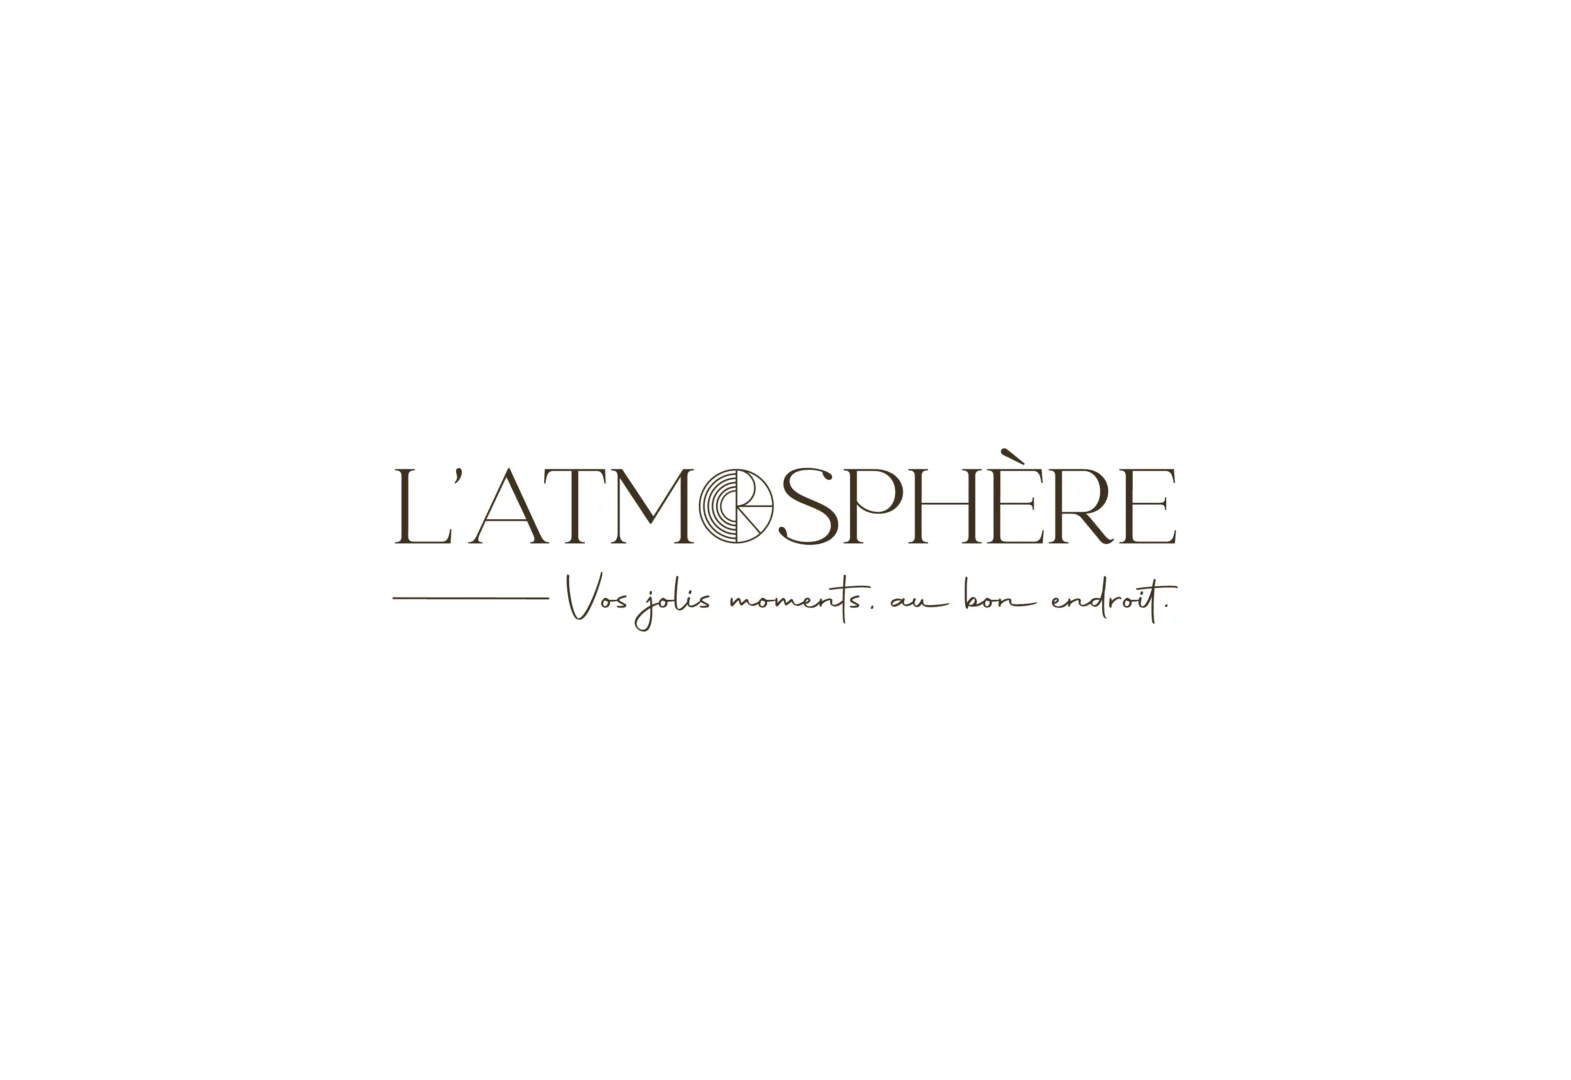 Logos-clients_LAtmosphere-by-Agence-Aurava